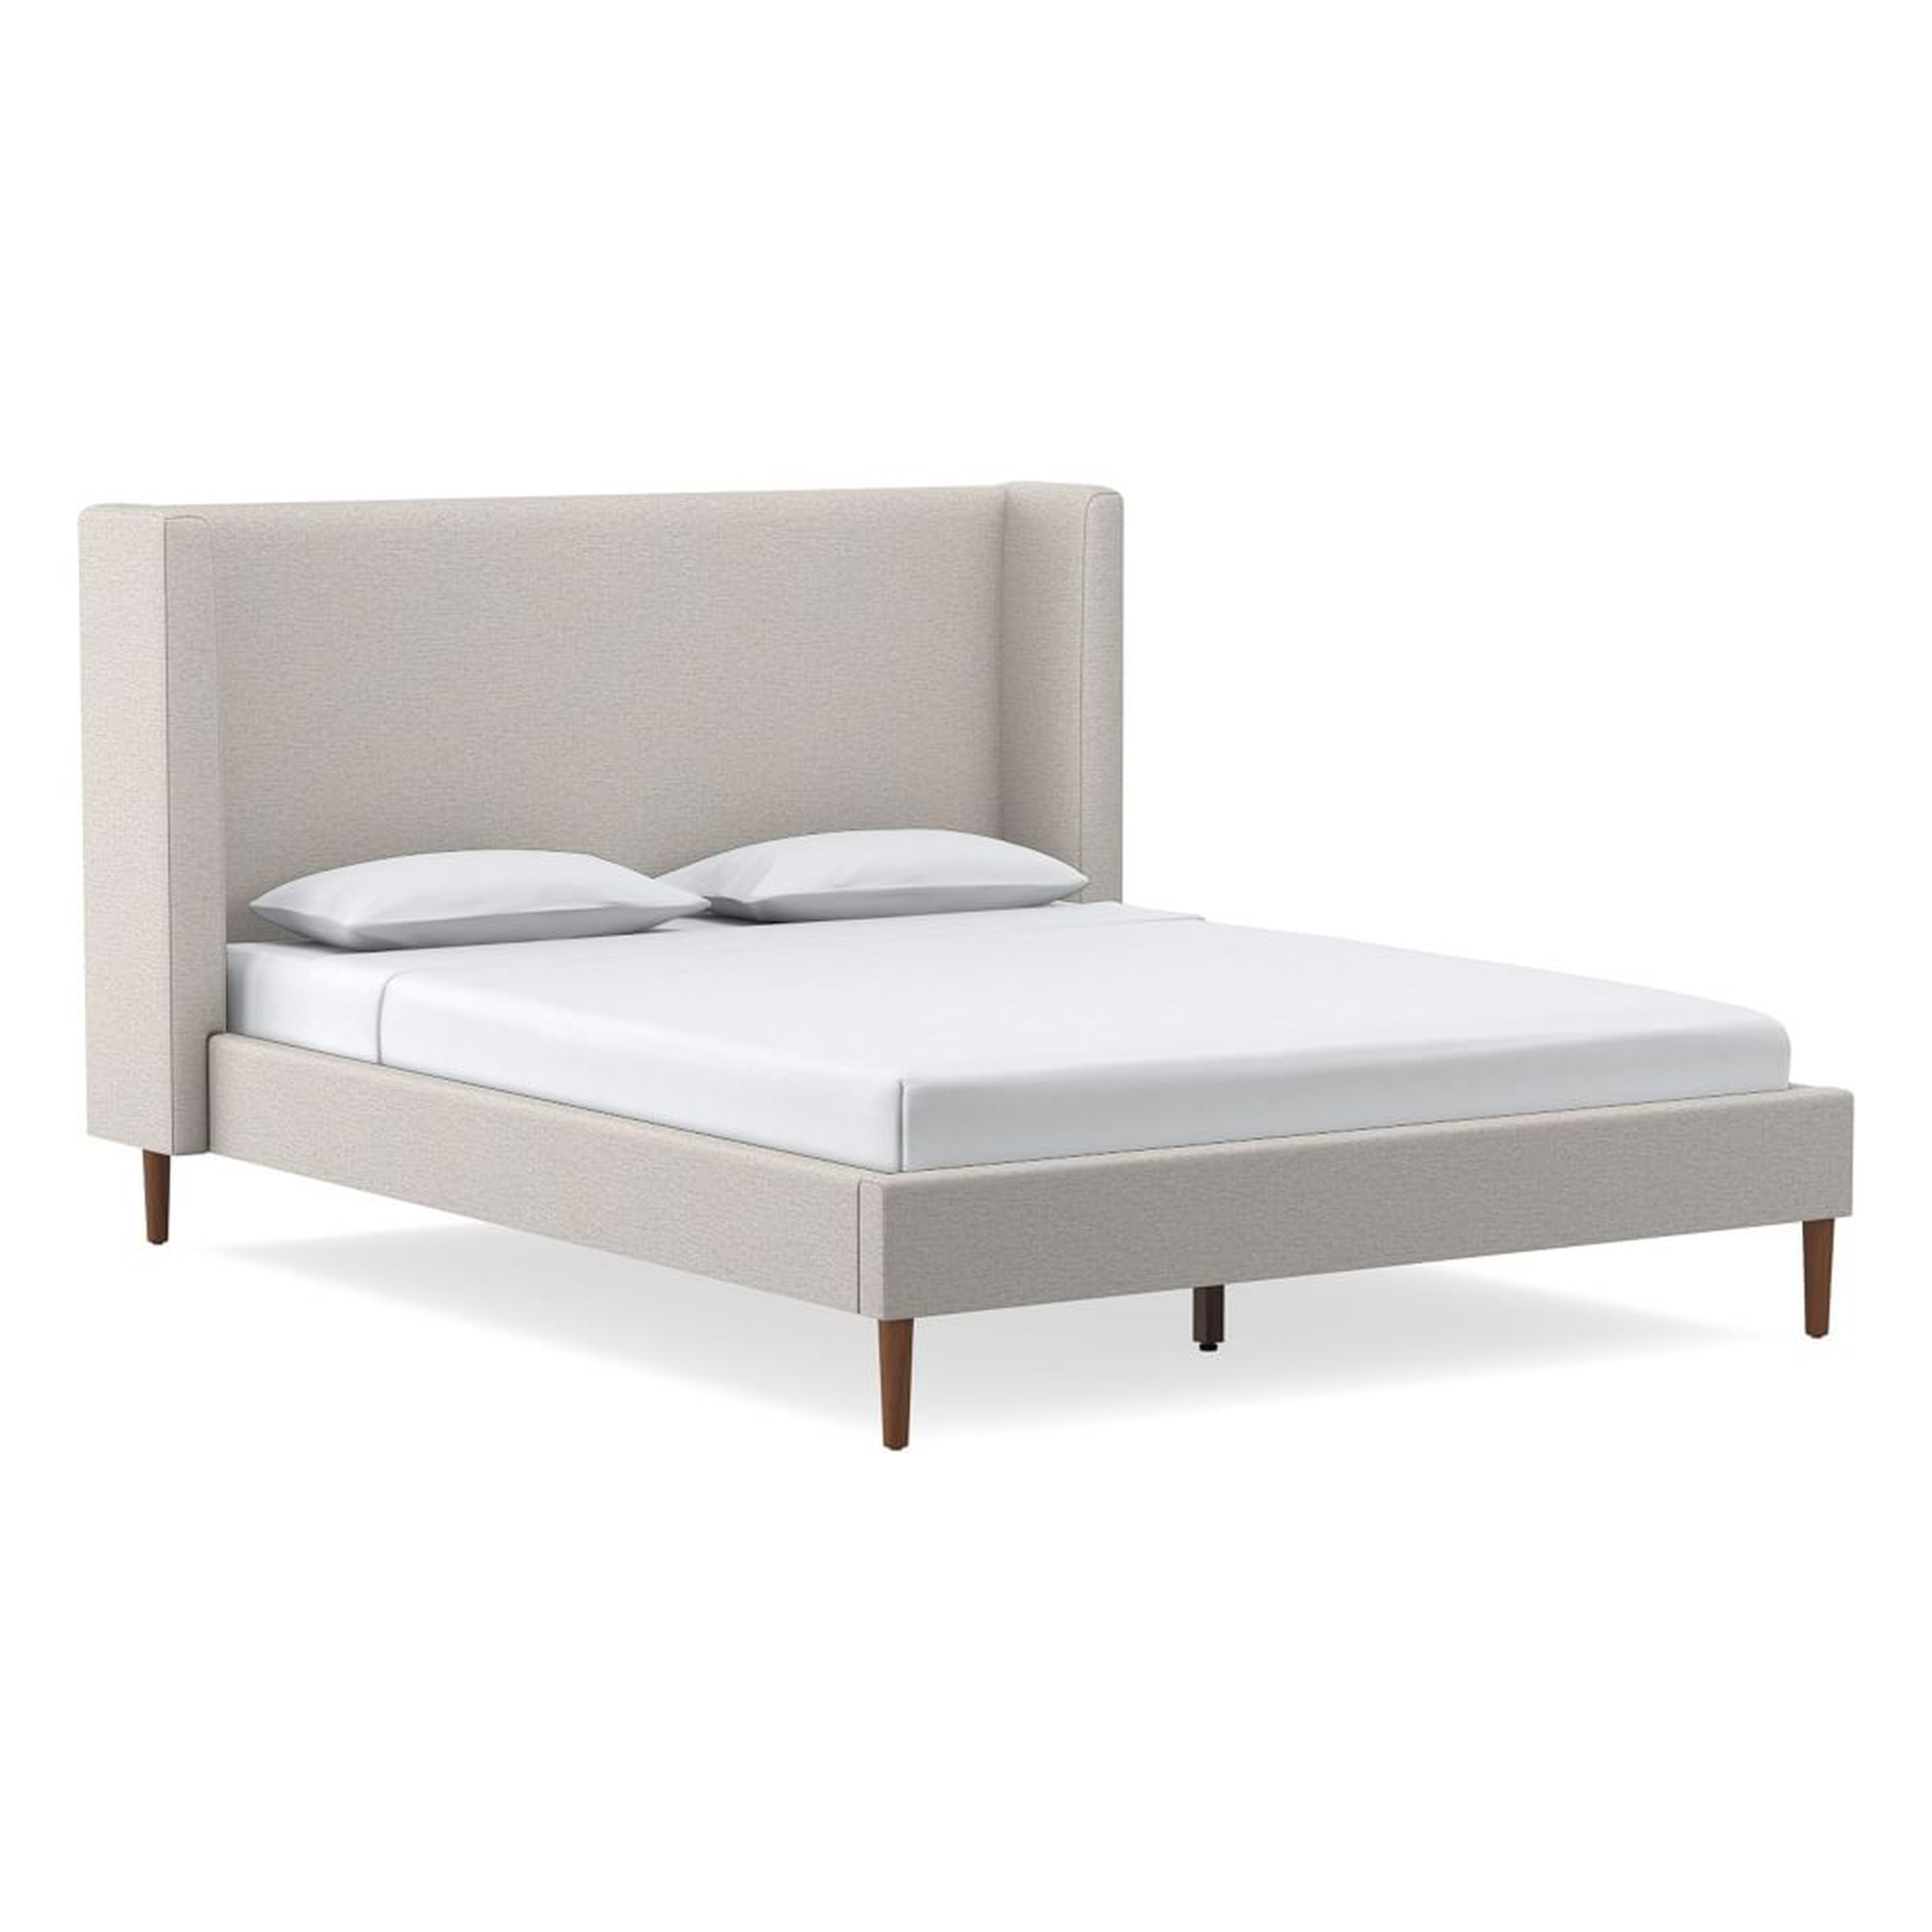 Shelter No Tufting, Bed, King, Twill, Sand, Cool Walnut - West Elm